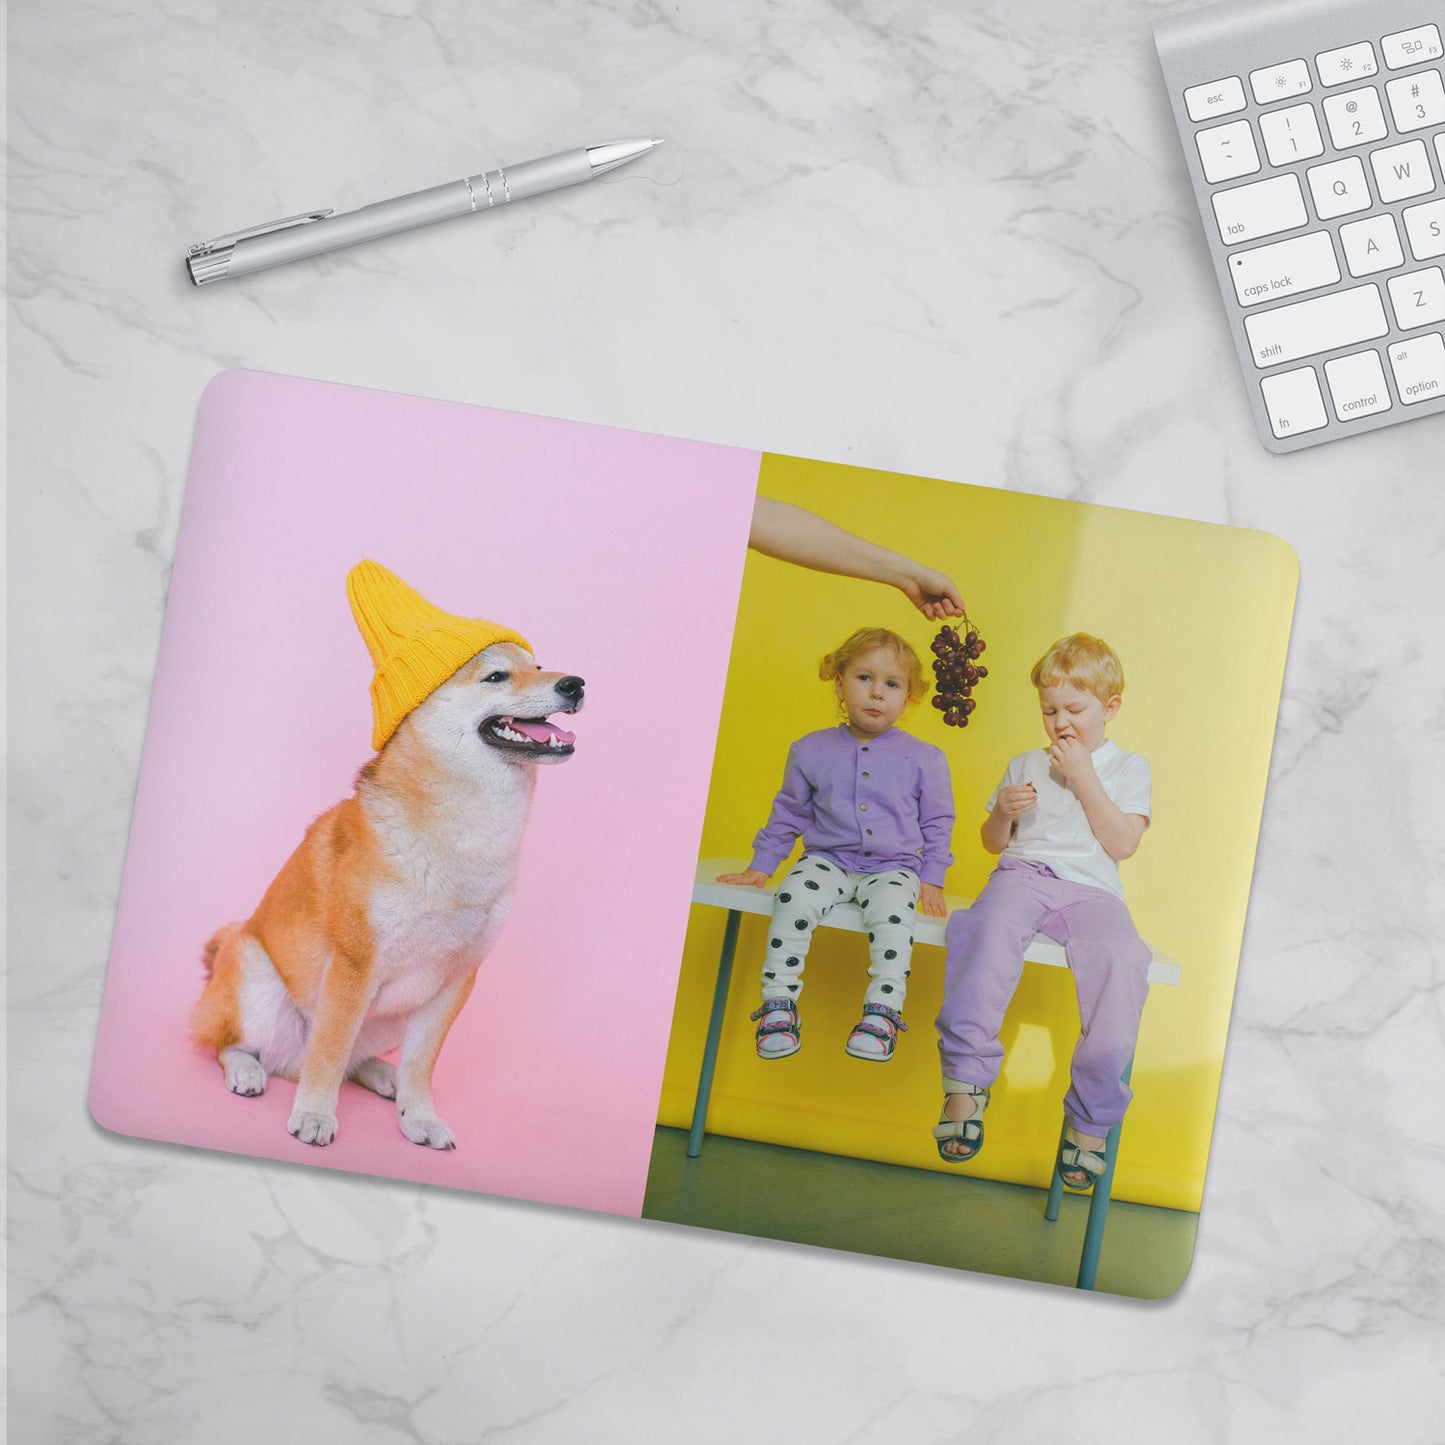 Custom Photo Macbook Hard Shell Case - Two Images Personalized